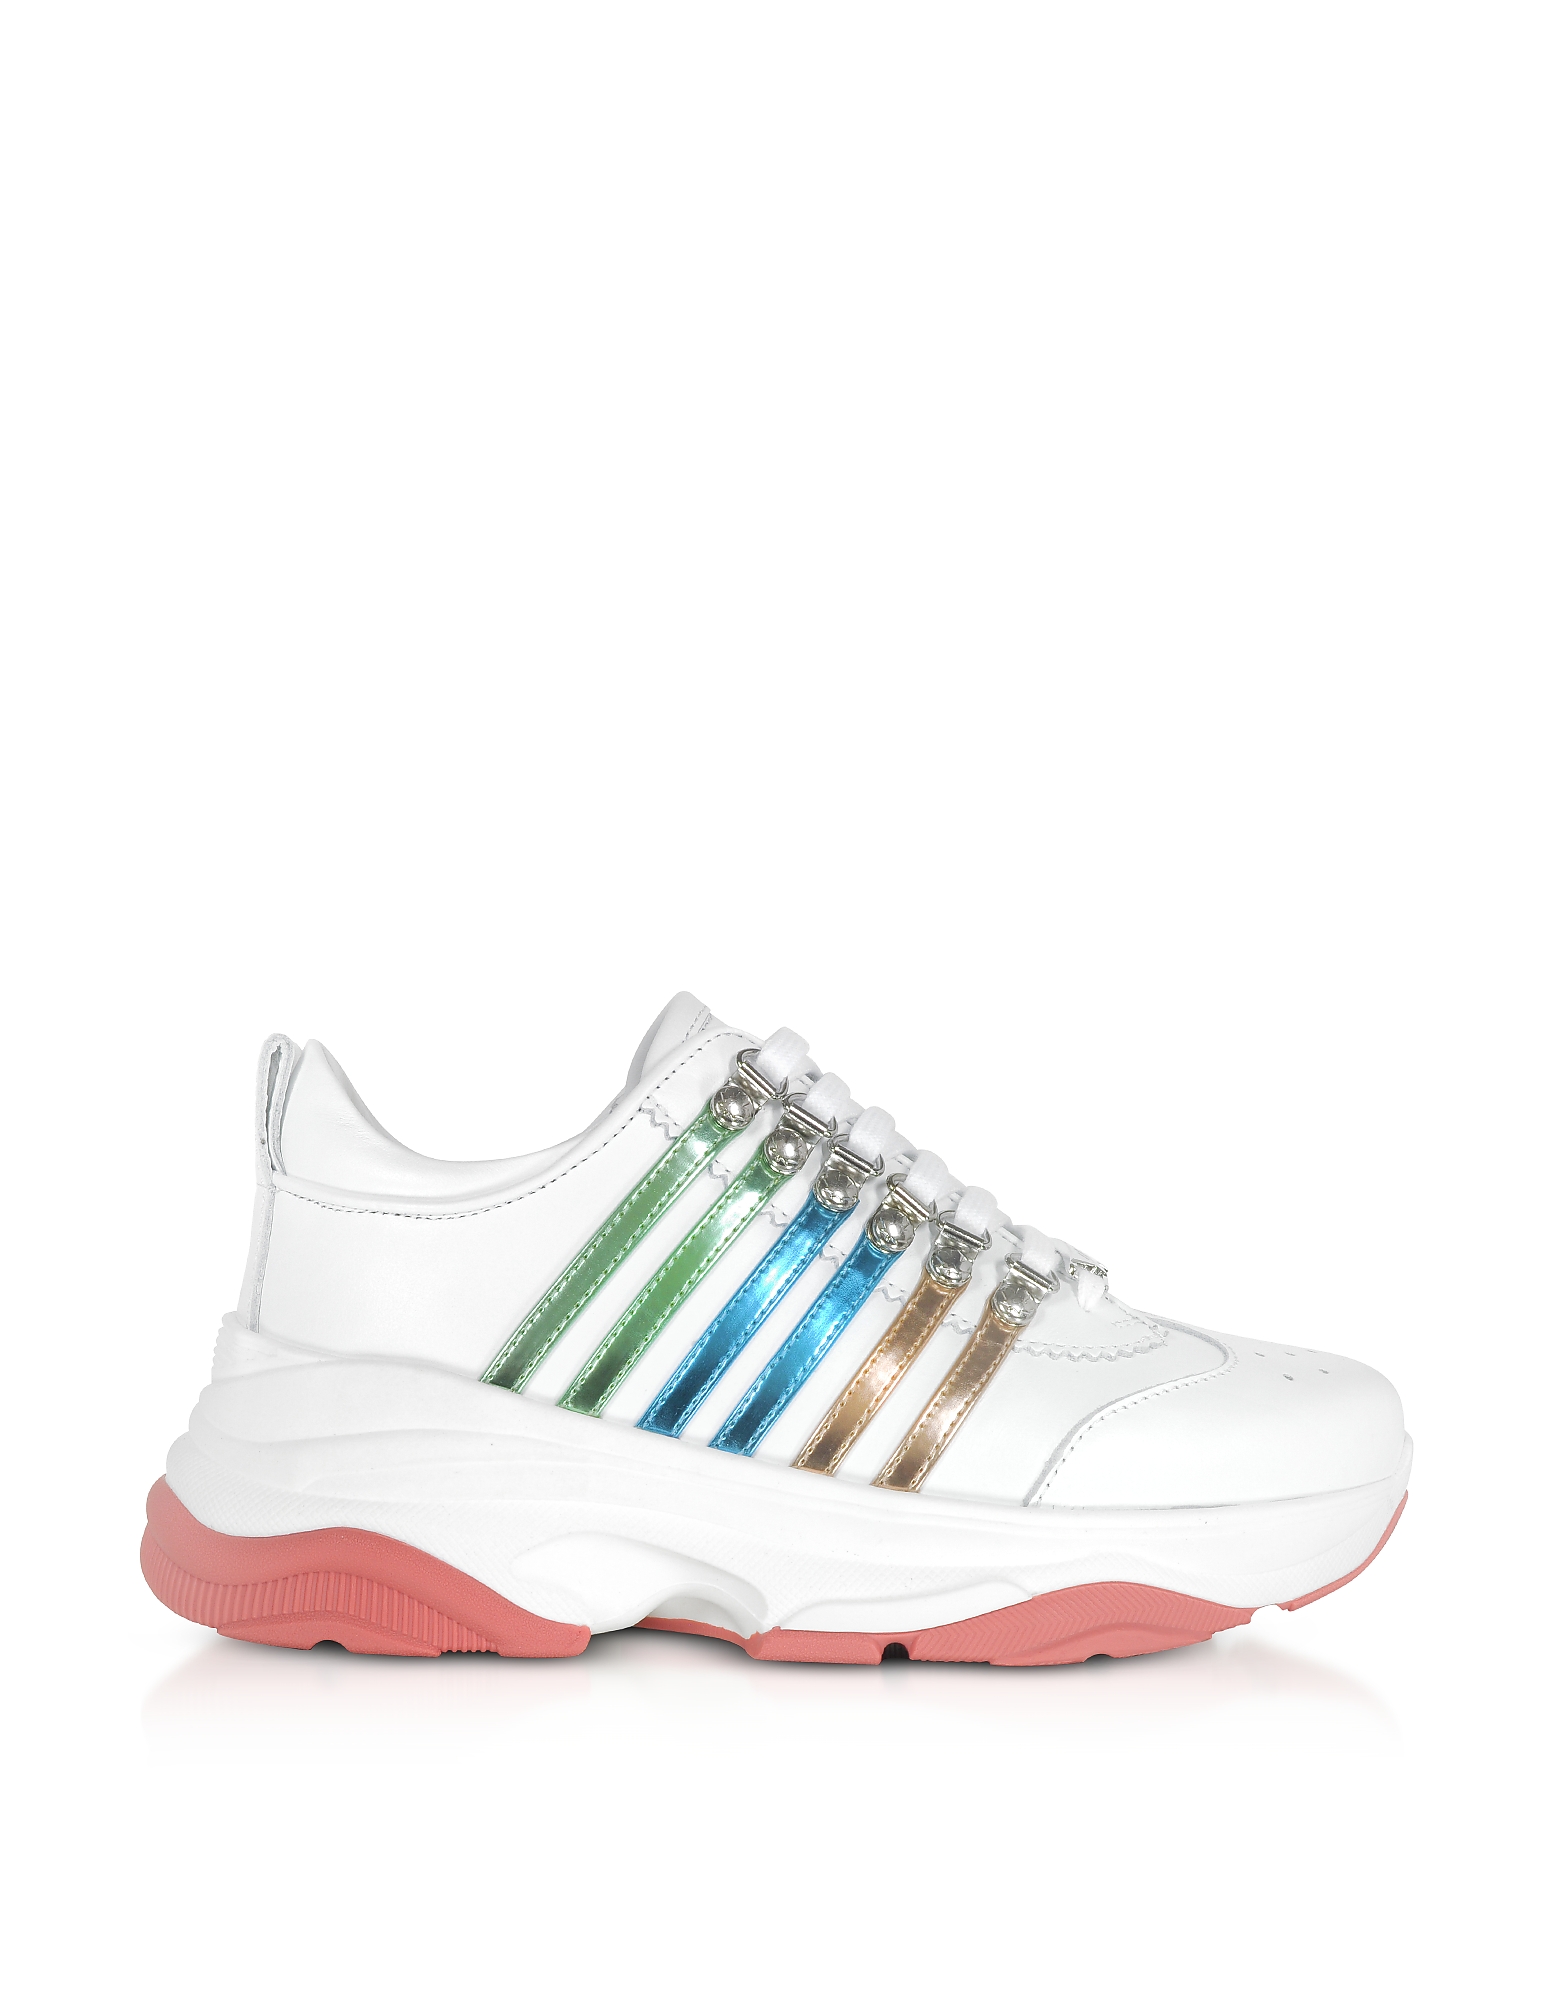 DSquared2 Designer Shoes, Bumpy 551 Women's White, Green & Blue Calf Leather Sneakers